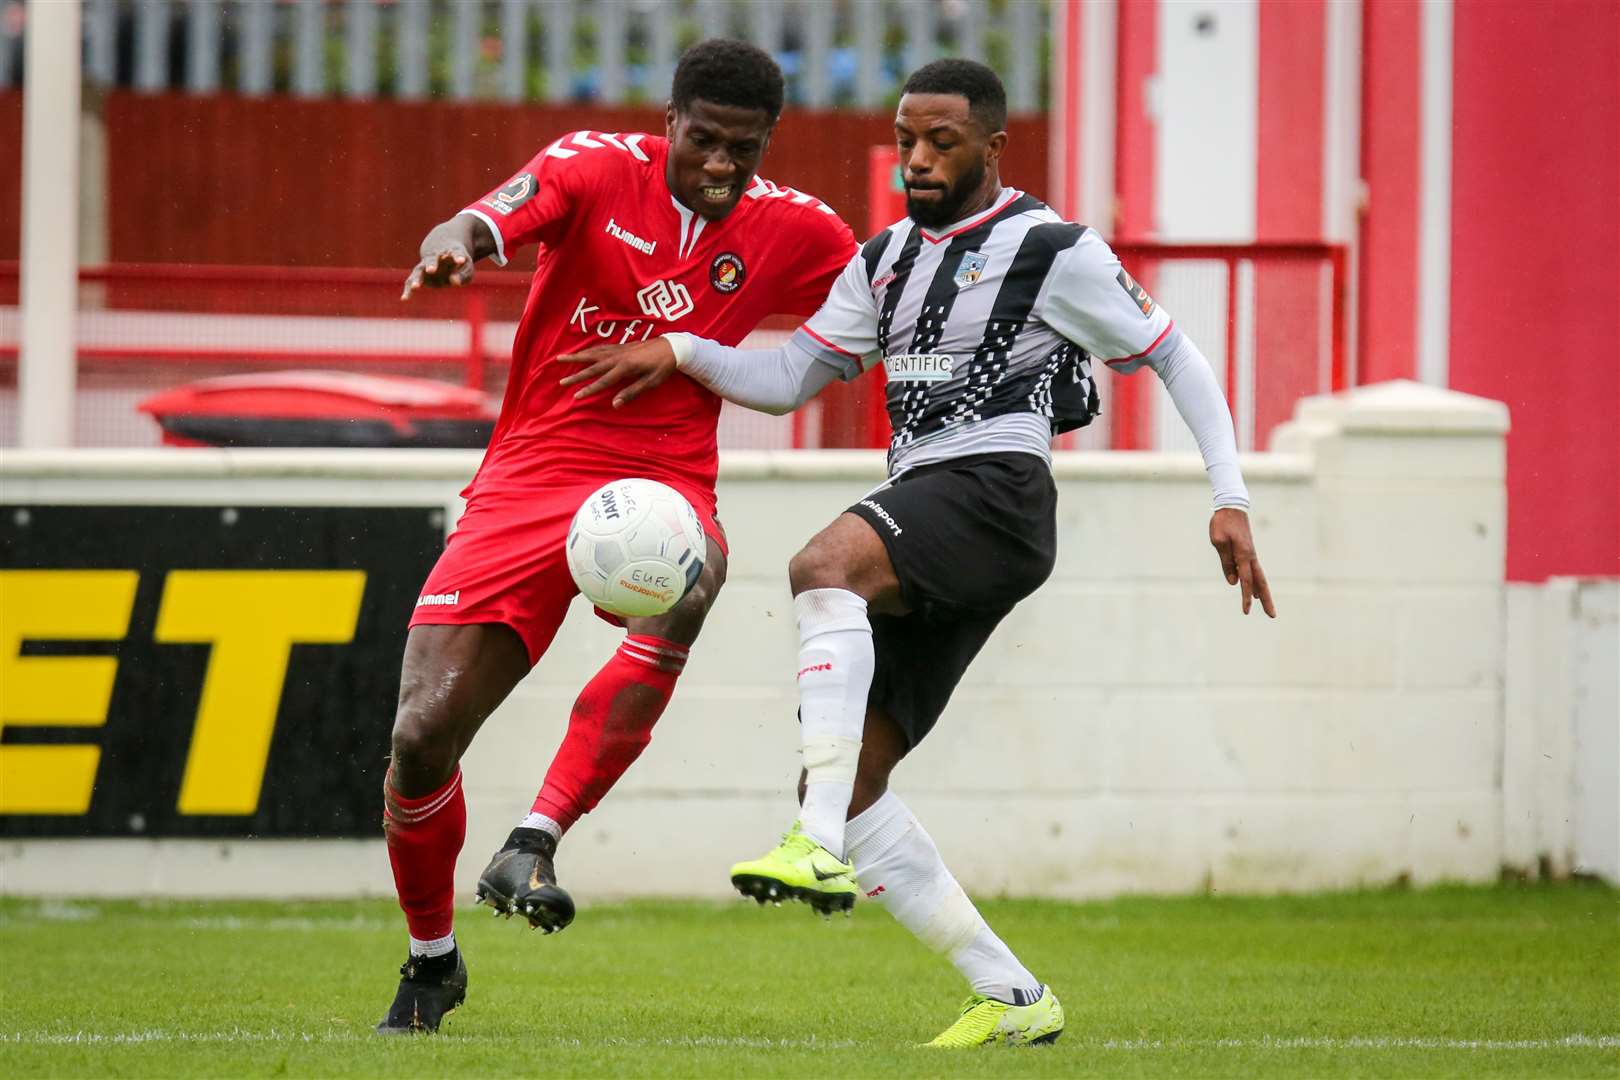 Ebbsfleet United in National League action during the 2019/20 season Picture: Matthew Walker